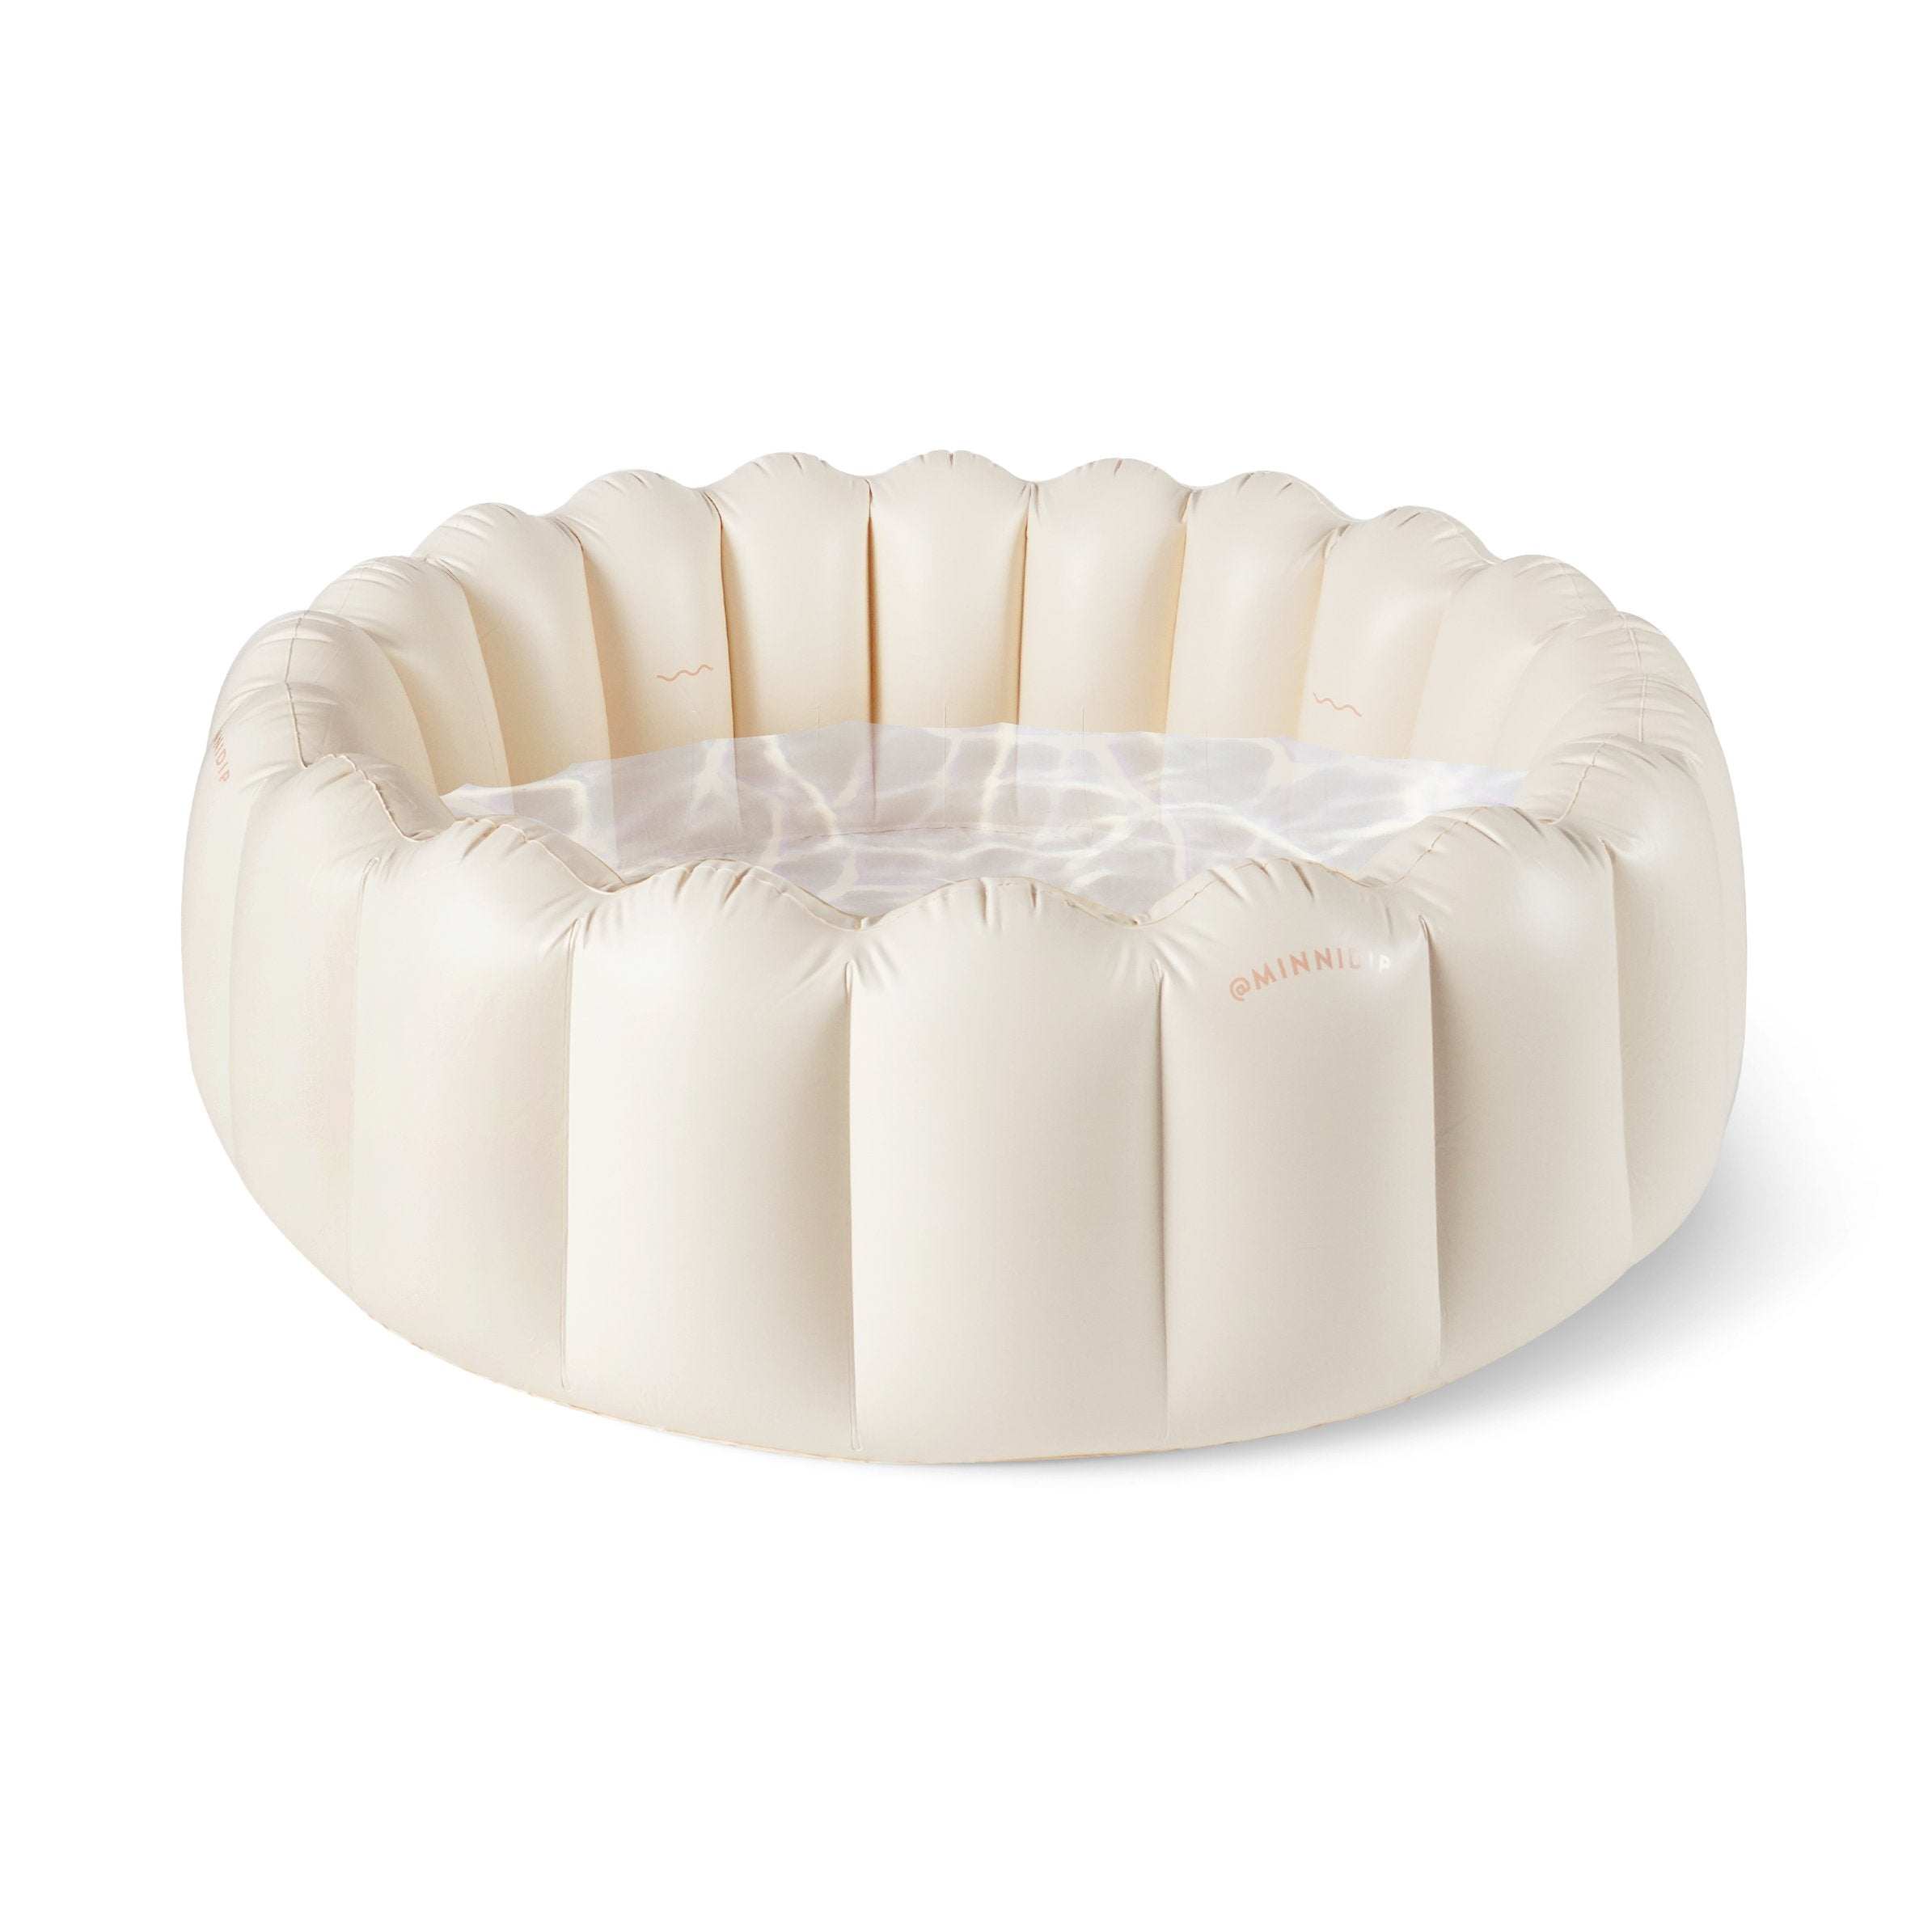 the CREAM TUFTED luxe inflatable pool